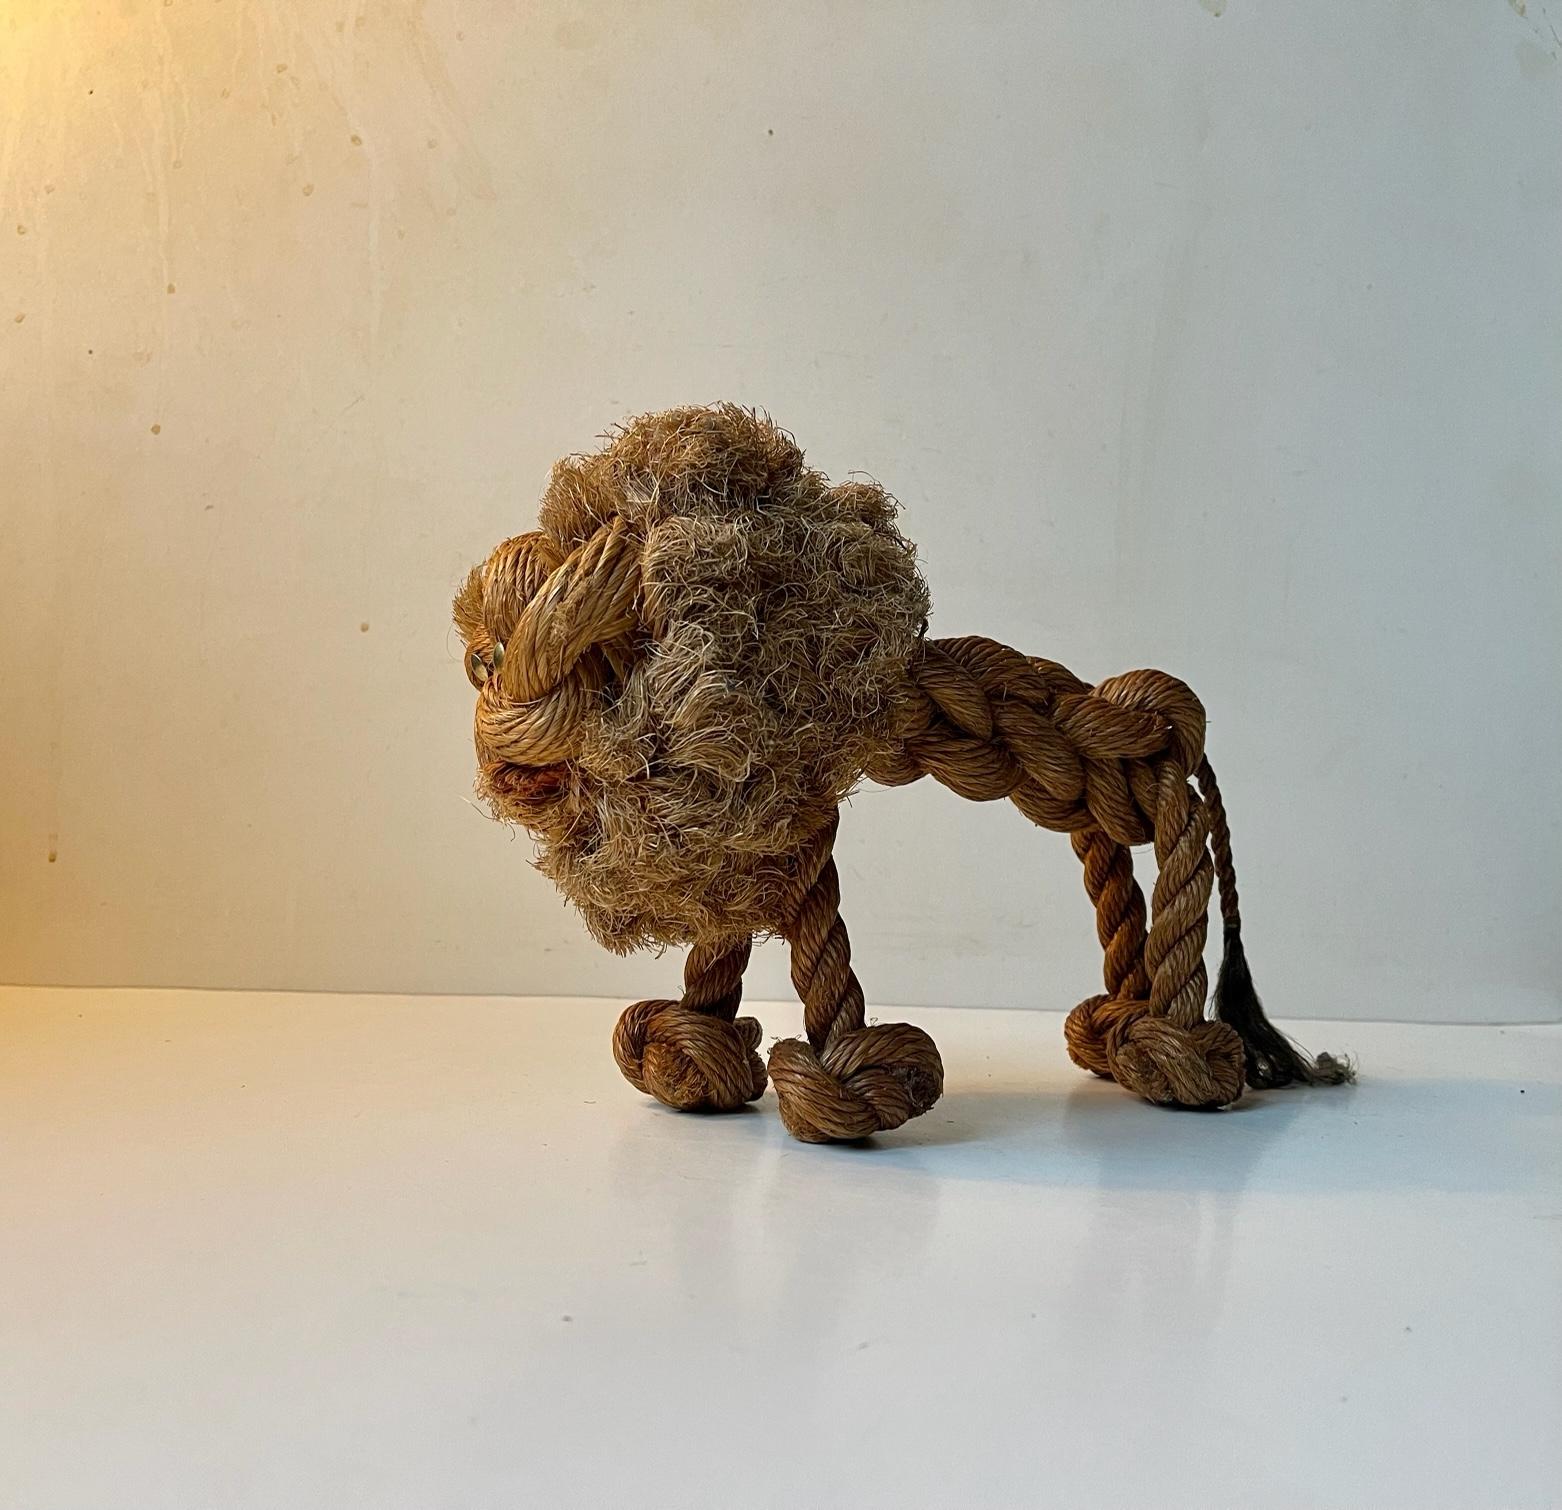 A rare example of the Danish toy-design-master Kay Bojesen work. This lion in braided natural rope was designed I collaboration between Jorgen Bloch and Kay Bojesen in latter part of the 1950s and it was discontinued in the catalogue after a few